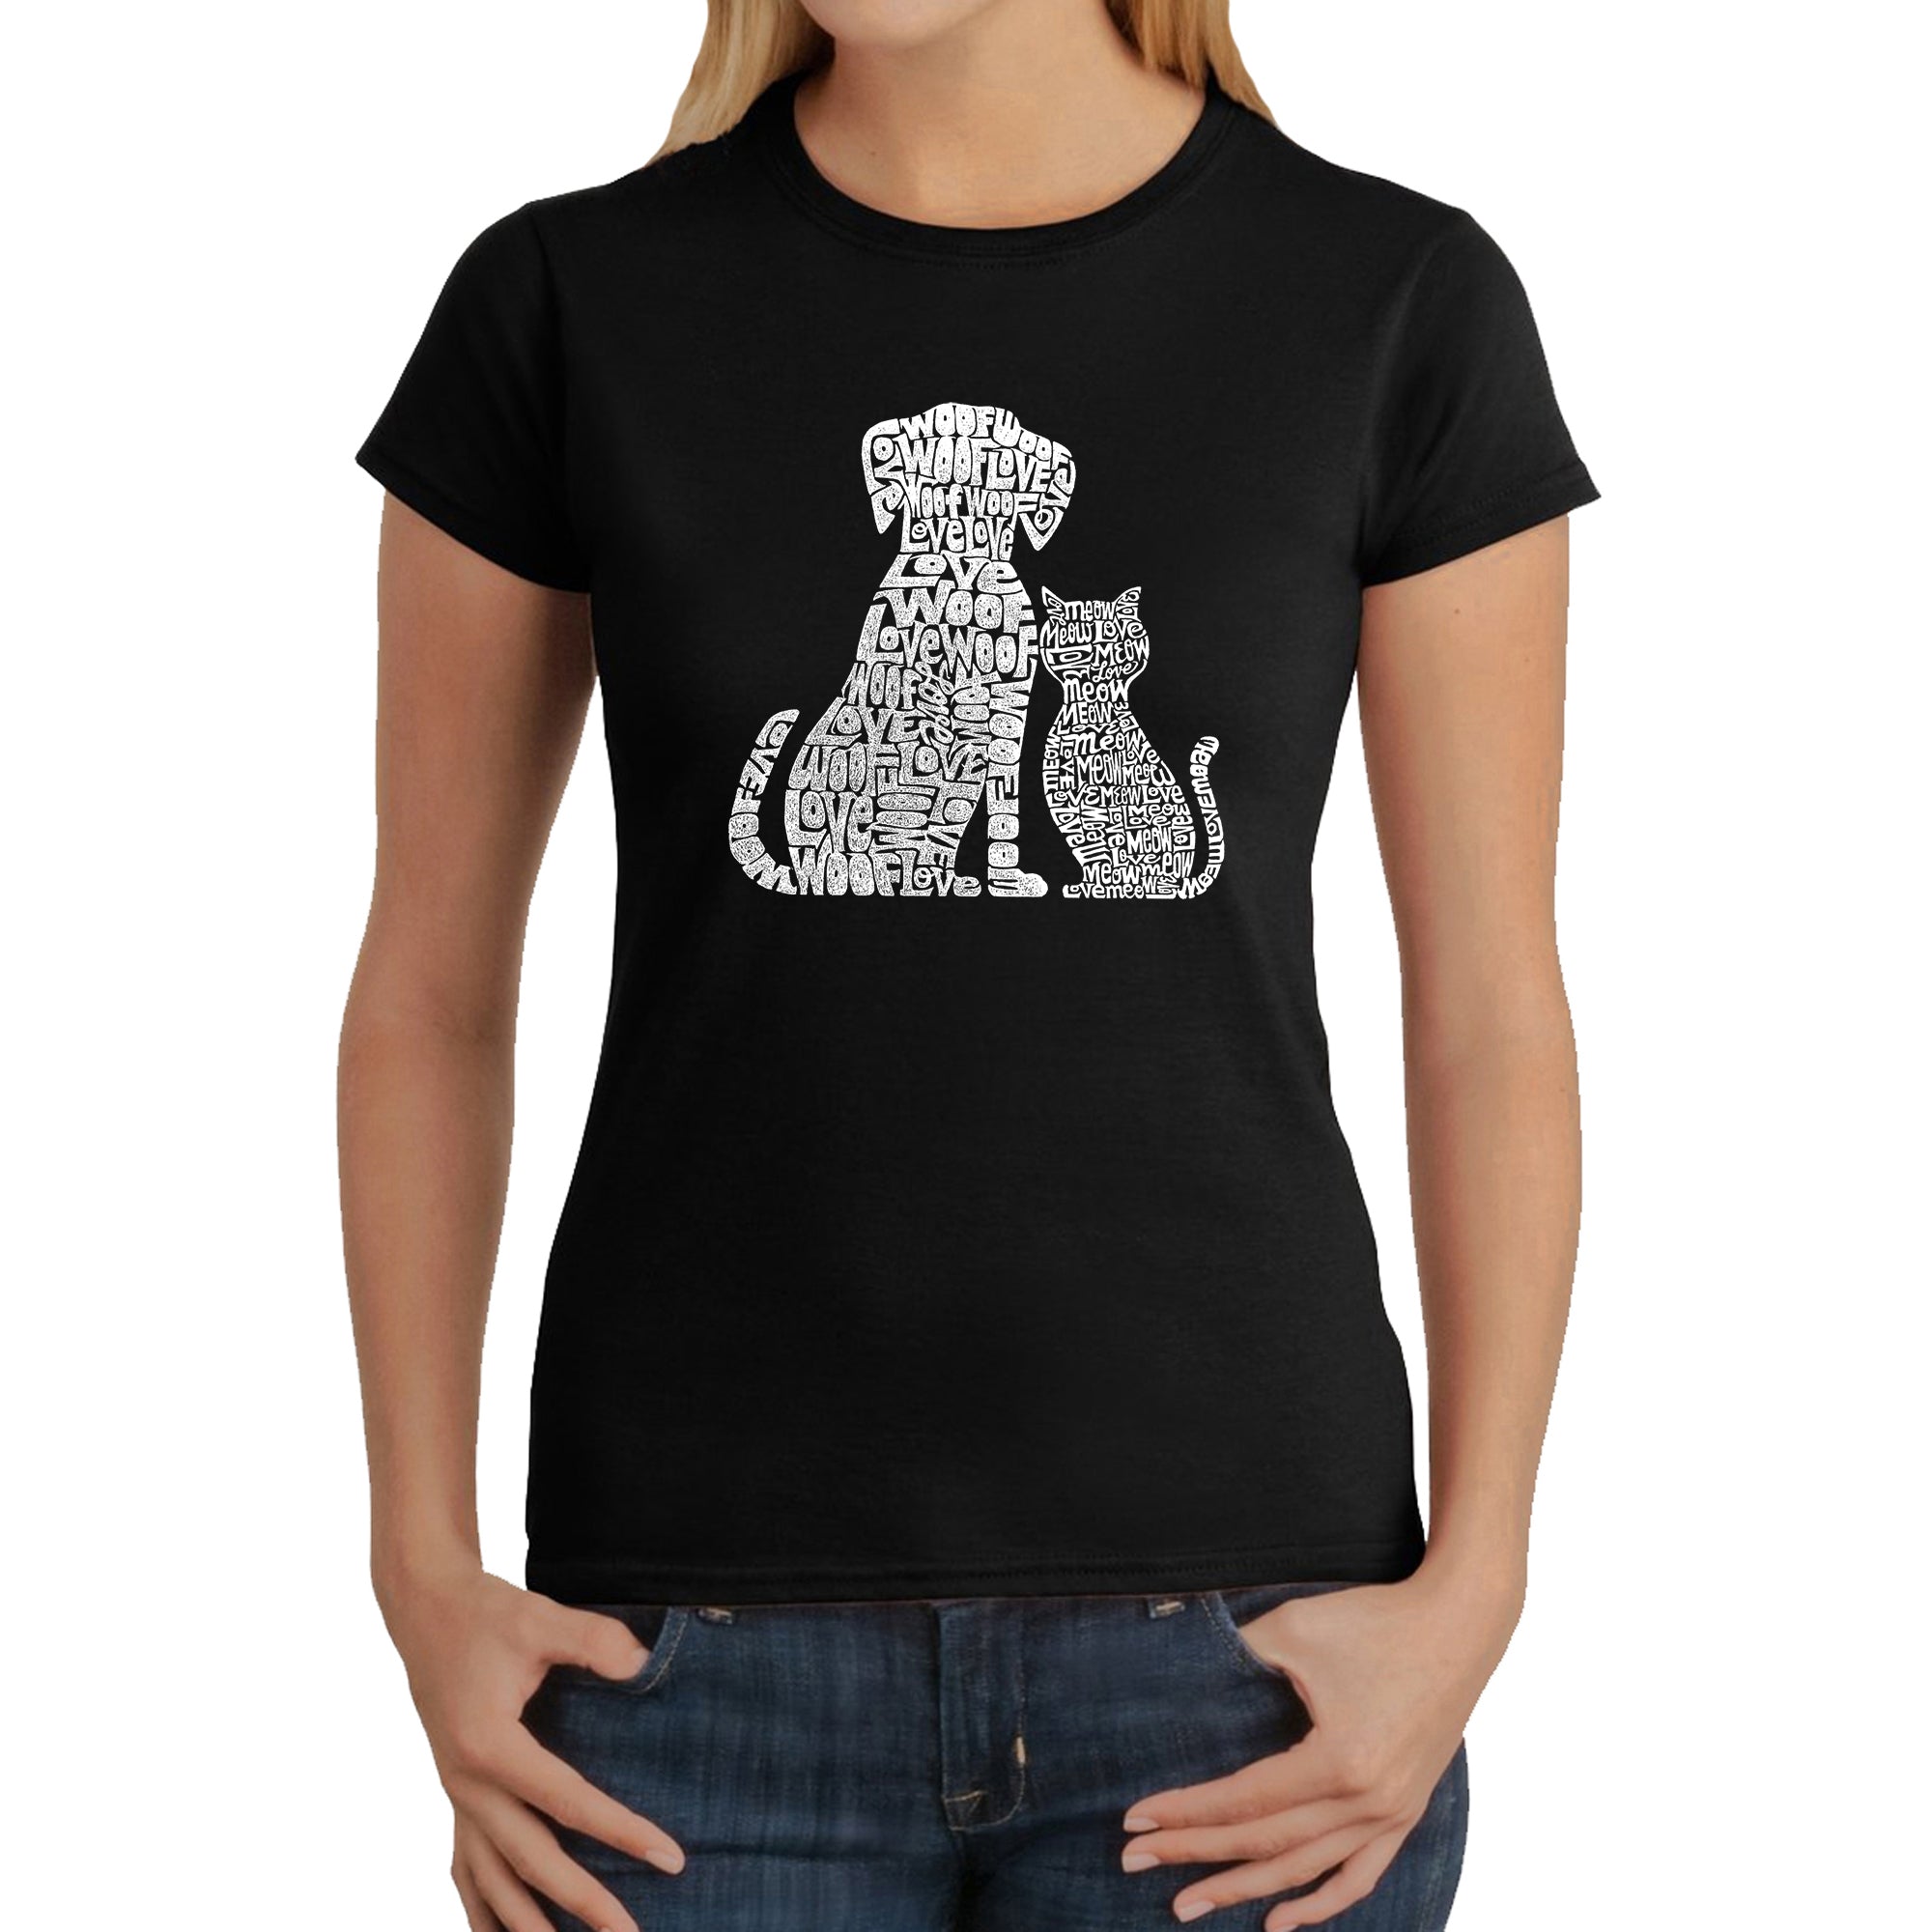 Dogs And Cats - Women's Word Art T-Shirt - Black - Large